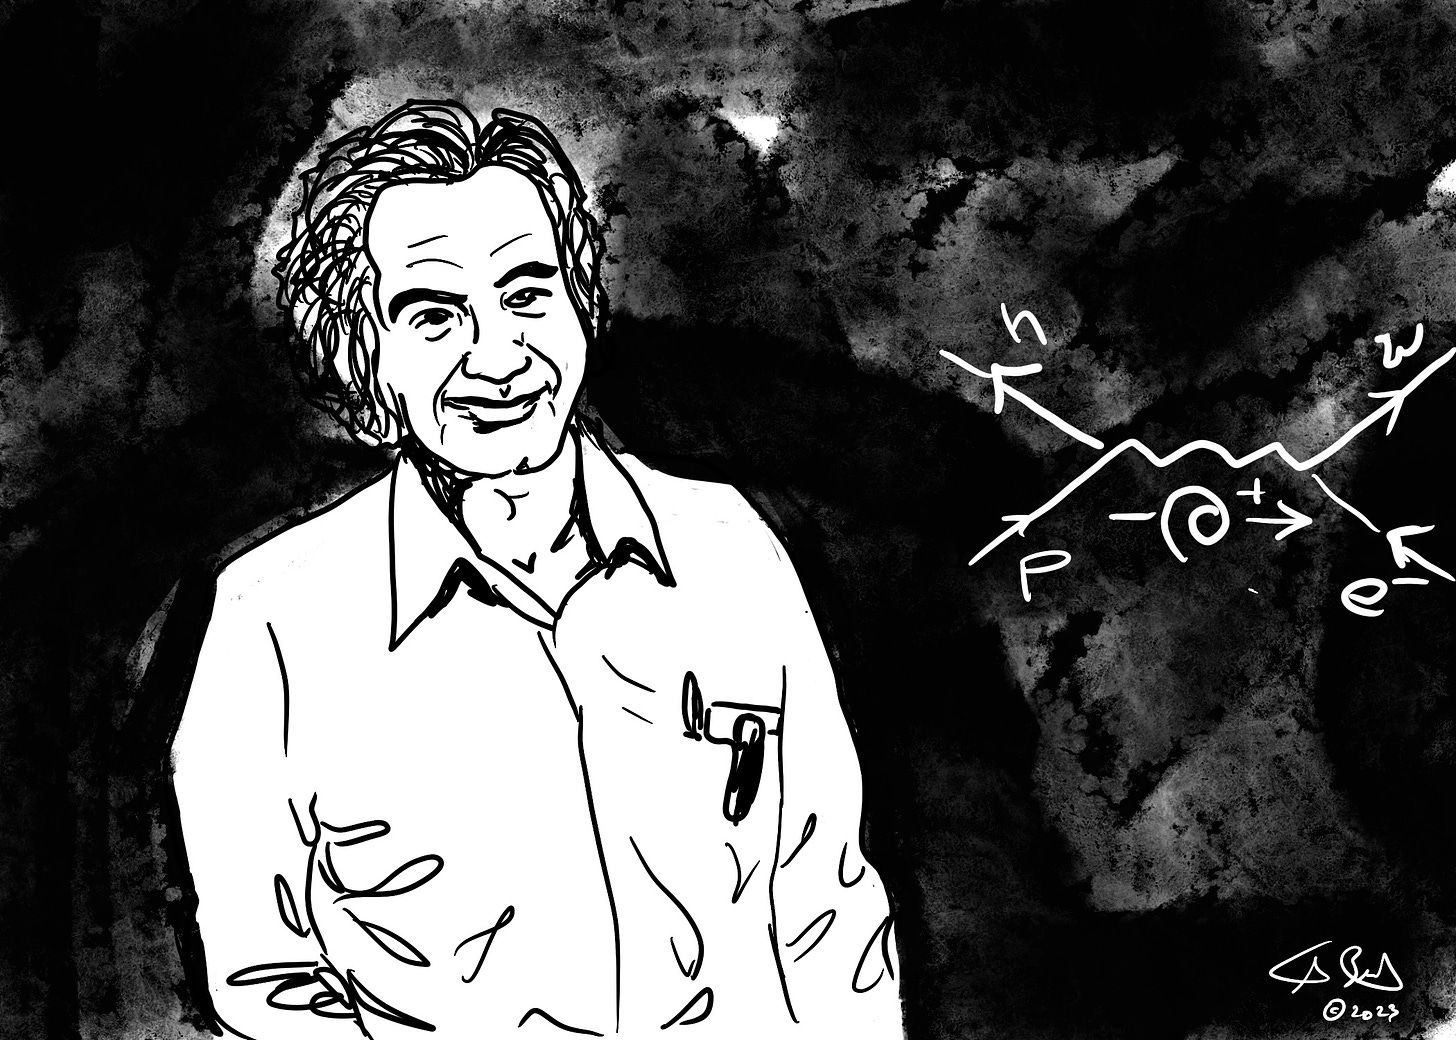 A Procreate illustration of Richard Feynman standing in front of a whiteboard where he liked to lecture.